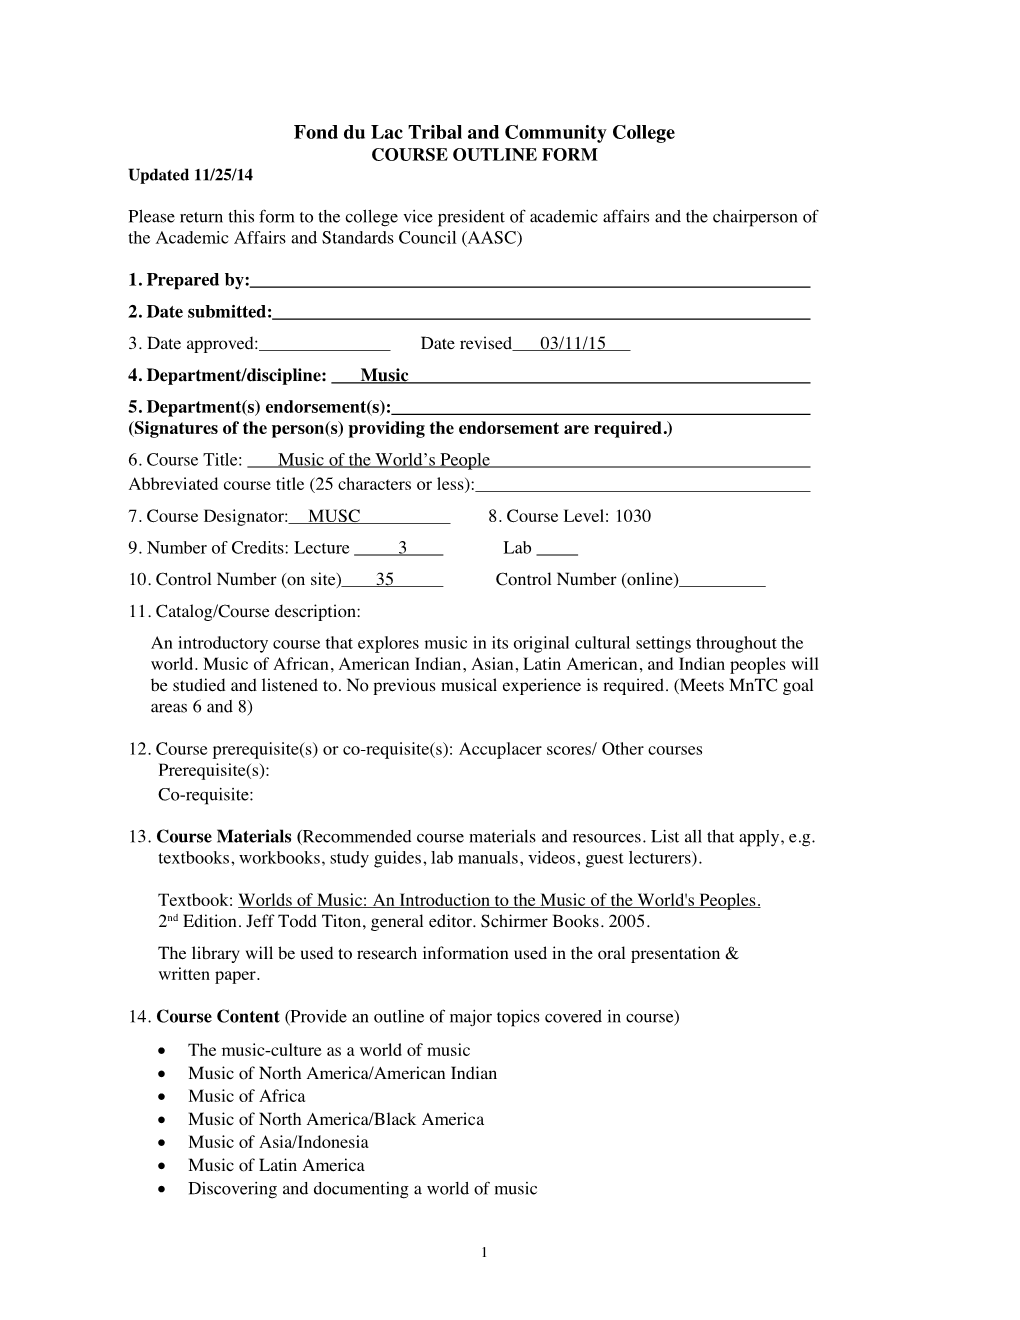 Fond Du Lac Tribal and Community College COURSE OUTLINE FORM Updated 11/25/14